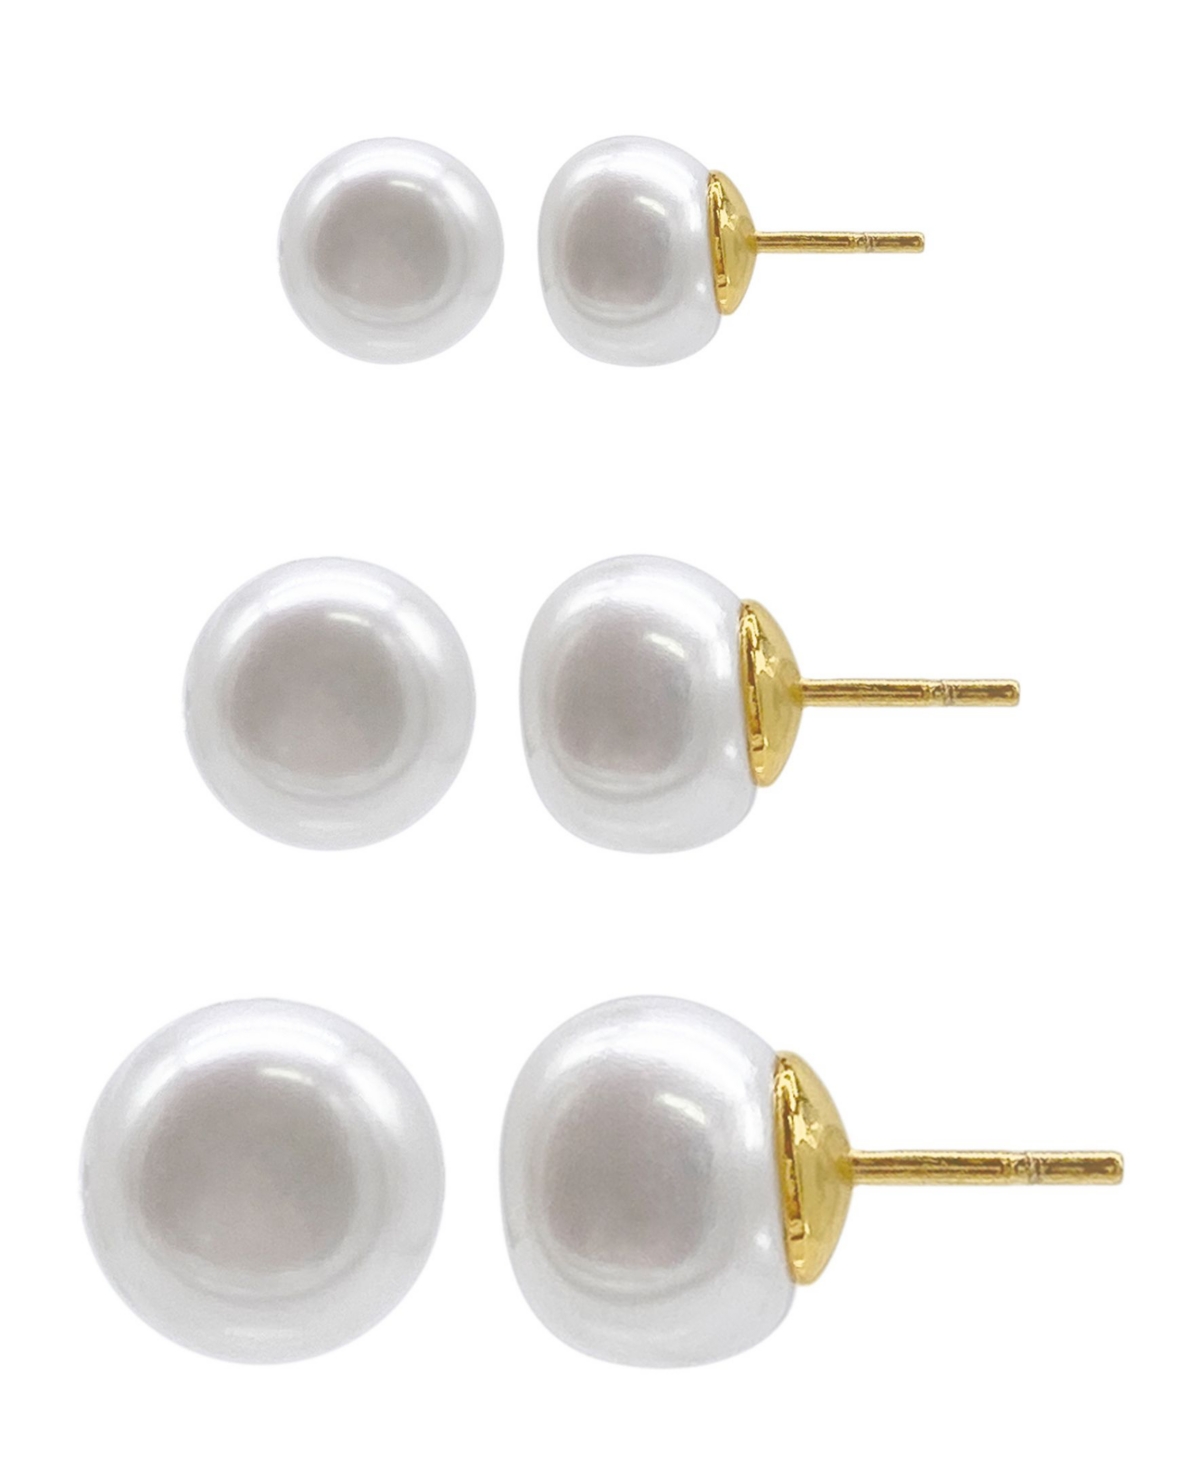 Adornia 14k Gold Plated Freshwater Pearl Stud Earrings Set, 6 Pieces In White